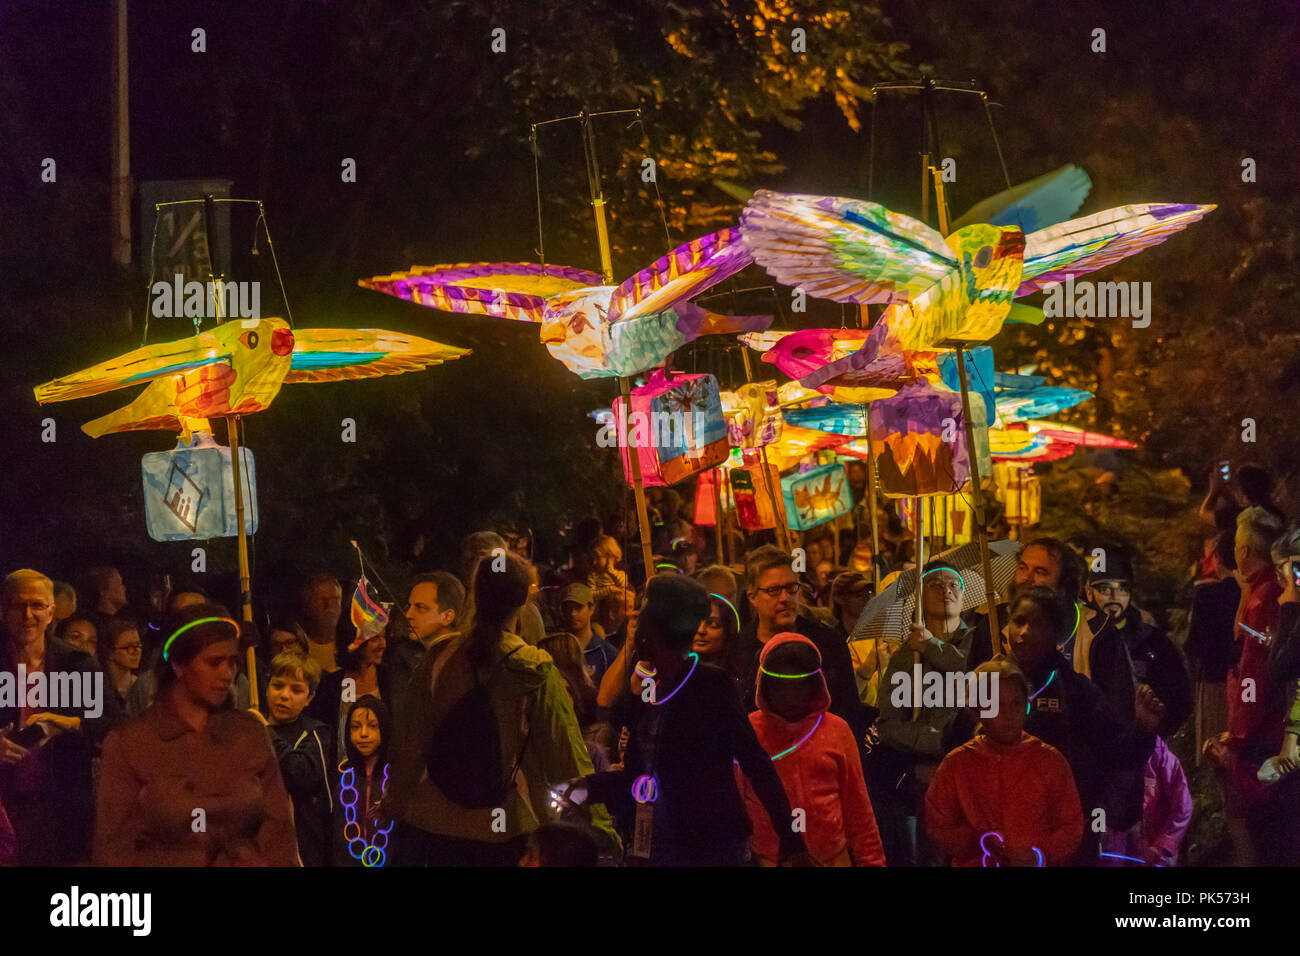 Local residents joined by Columbia University students and faculty carry lanterns created during the past week in the 7th annual Morningside Lights procession on Saturday, September 8, 2018. Produced by Columbia University Arts Initiative and Miller Theatre, the paper-mâché illuminated lanterns  fulfilled the theme of this years' procession; 'Flight', evoking human migration. The parade wound its way through Morningside Park eventually ending at the Columbia campus.  (© Richard B. Levine) Stock Photo